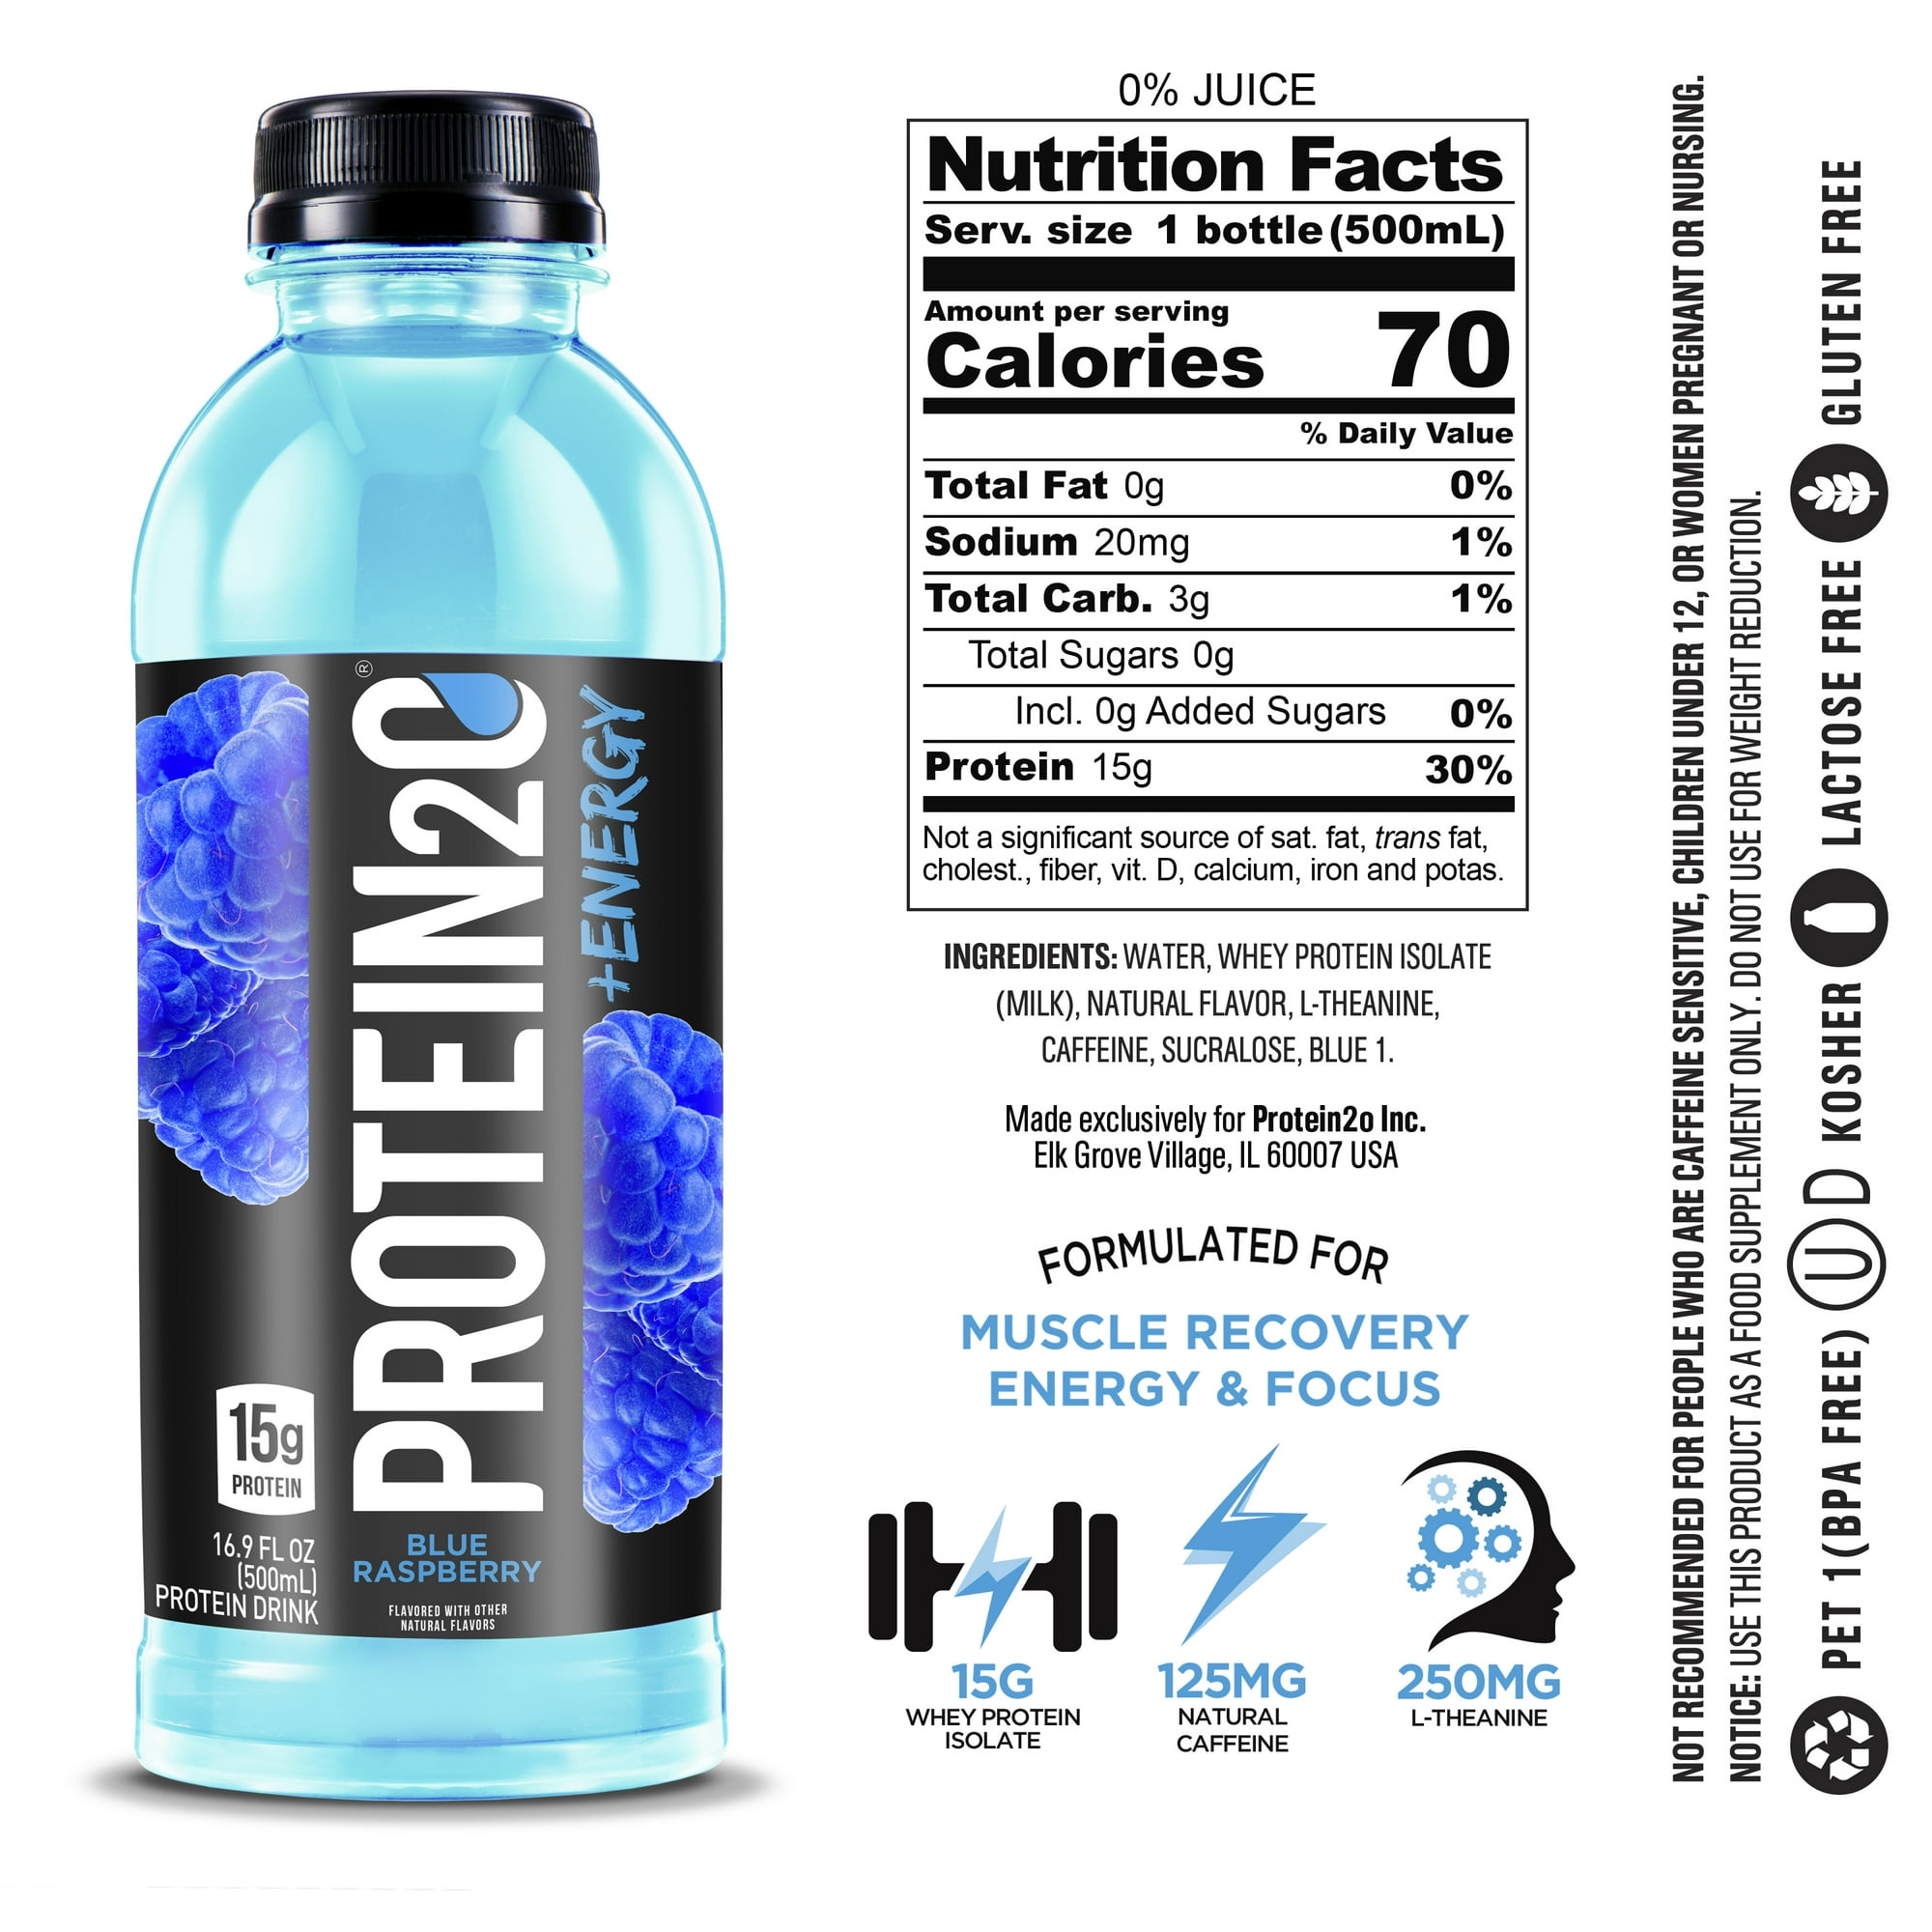 Protein2o 15g Whey Protein Infused Water Plus Energy, Blue Raspberry, 16.9 fl oz Bottle (Pack of 12)